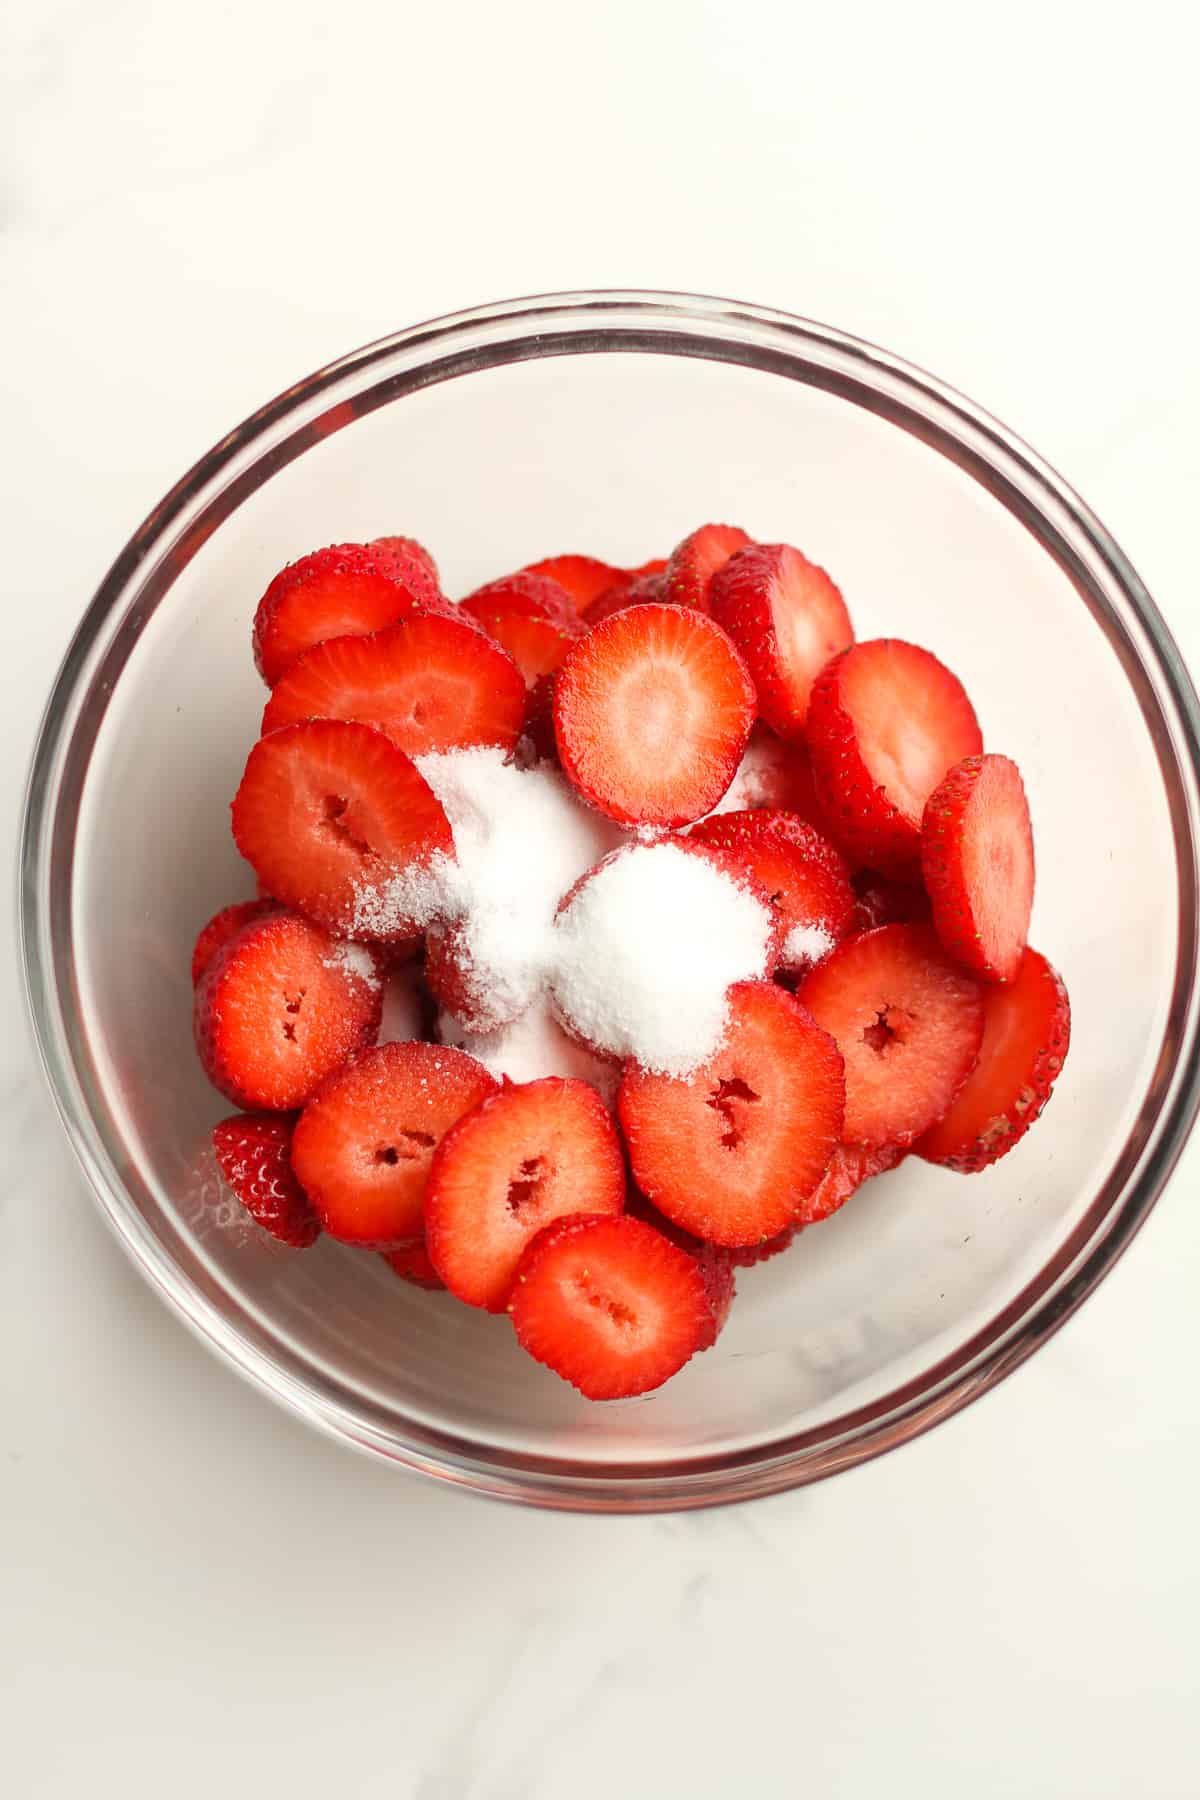 The sliced strawberries with some sugar on top.